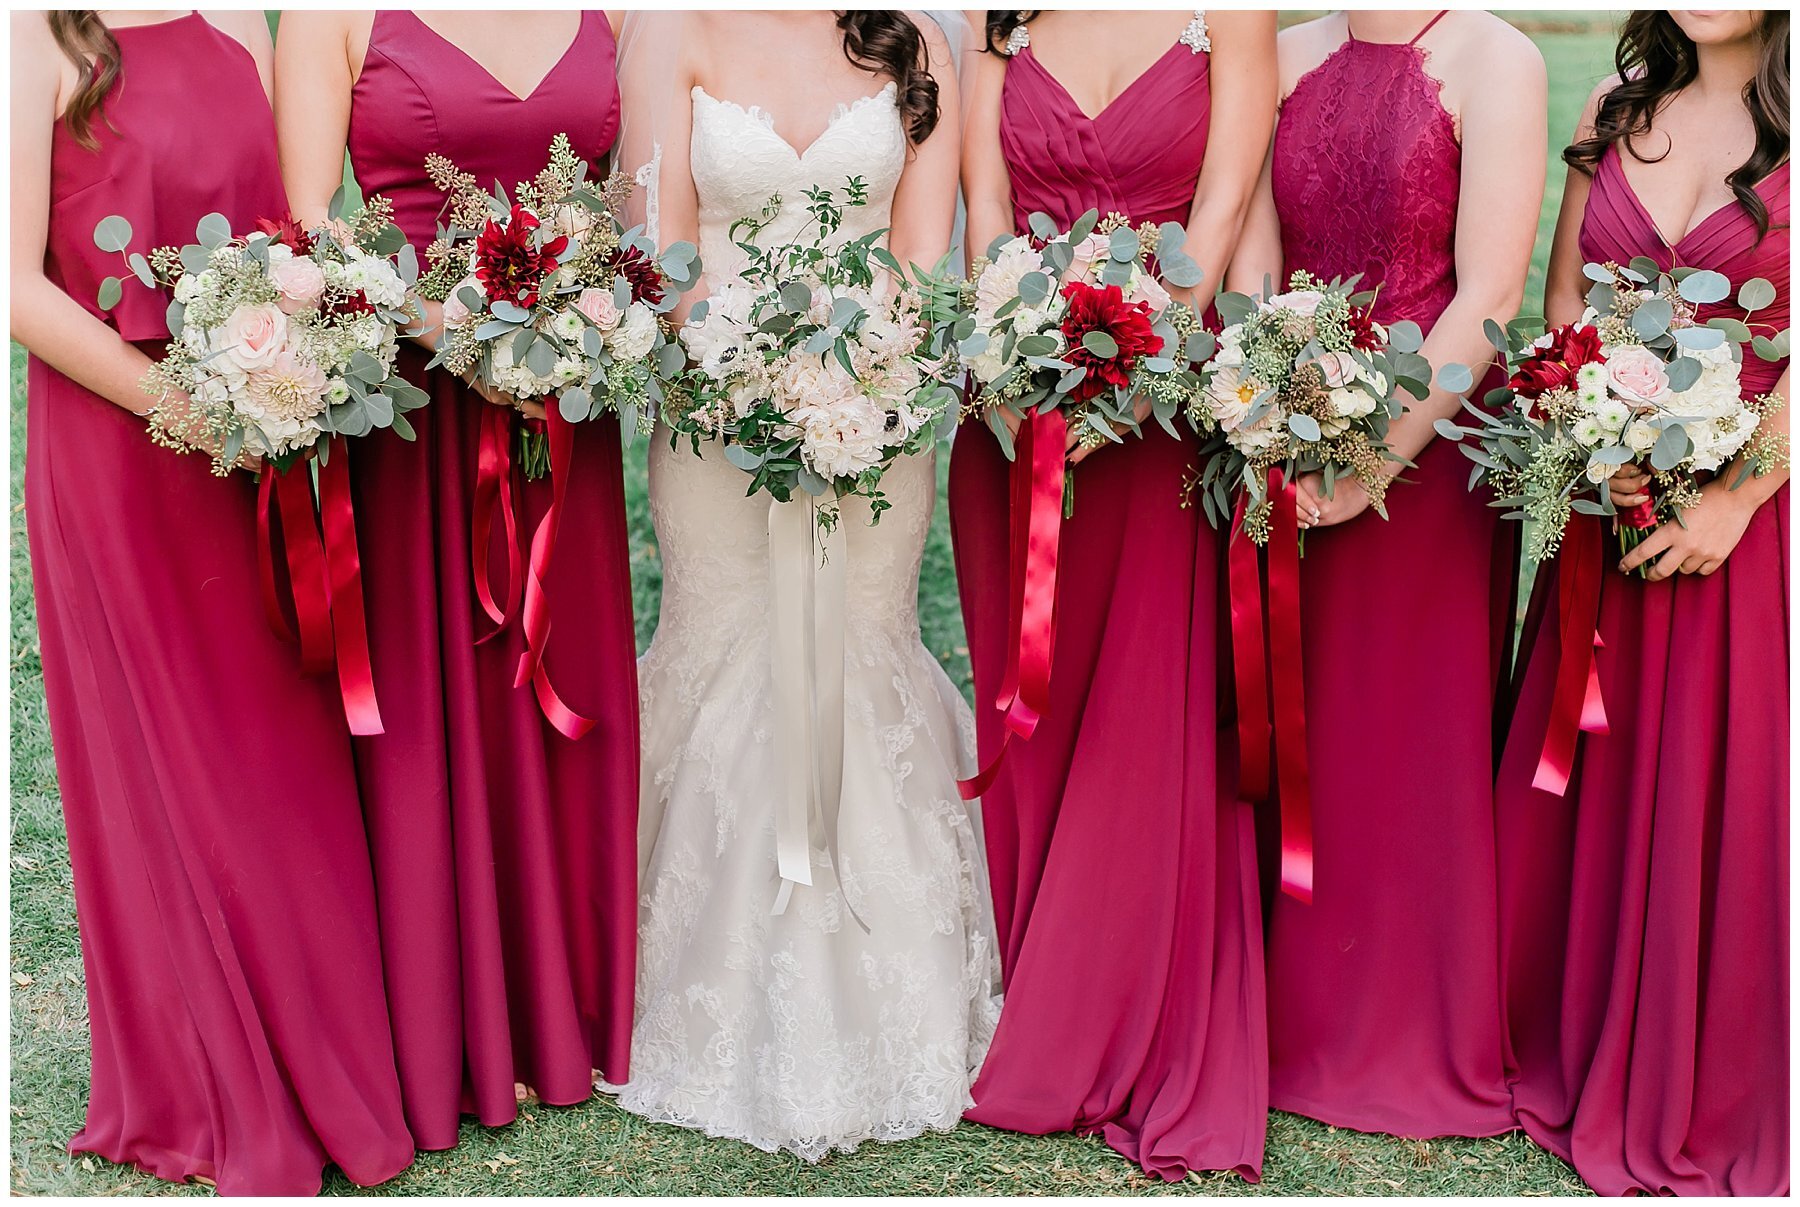  bride and bridesmaids holding their bouquets 